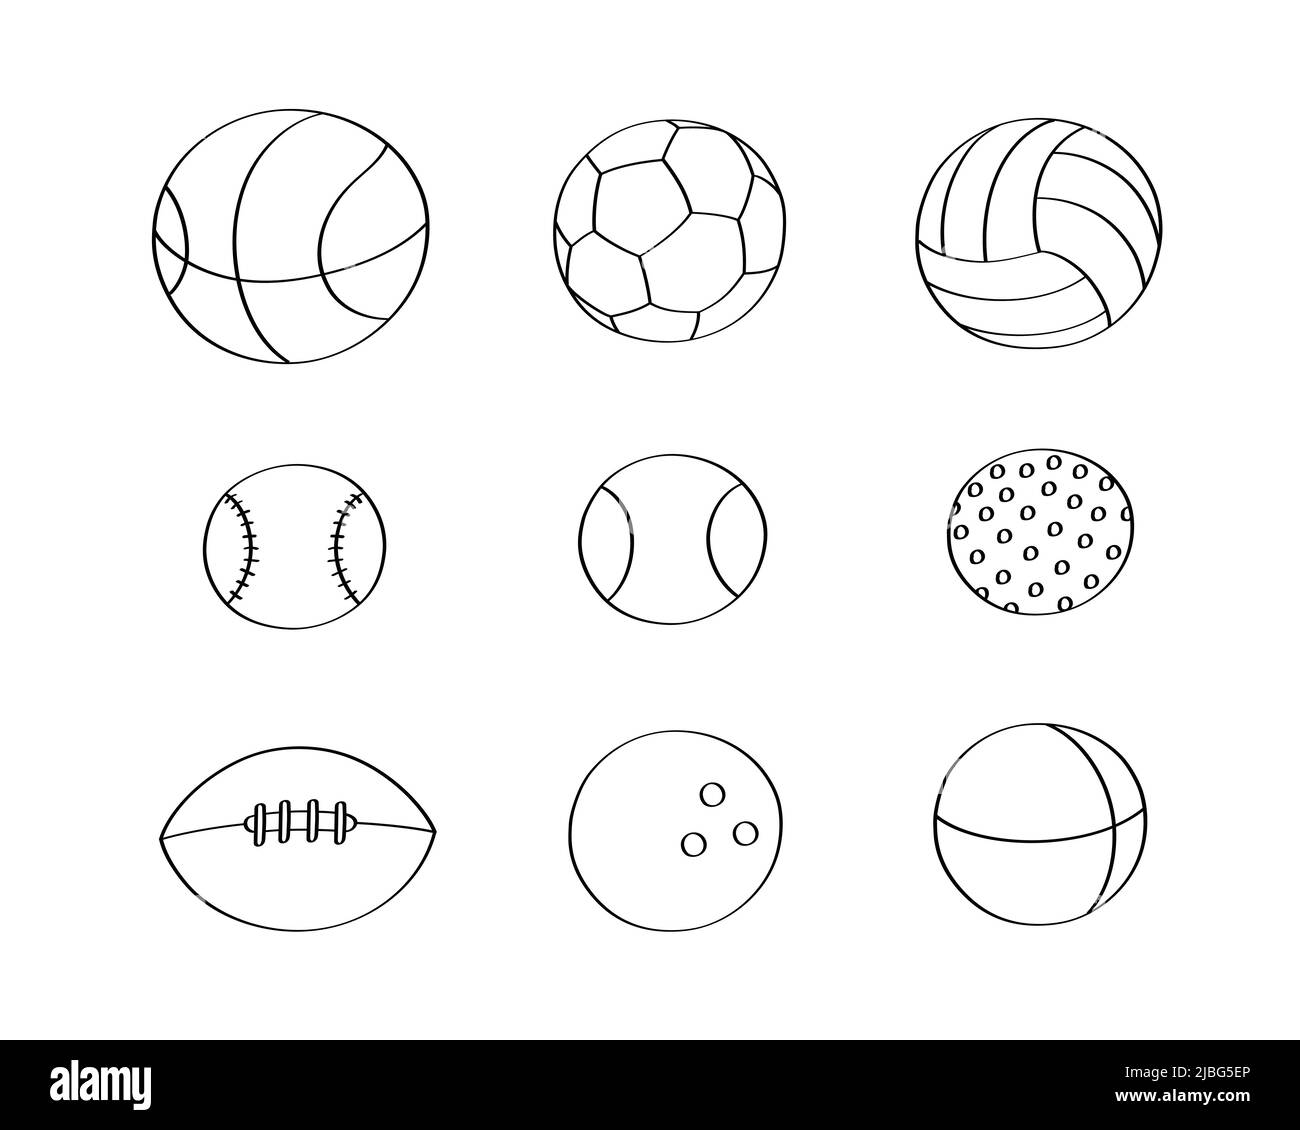 Cute doodle set of sports balls cartoon icons and objects. Stock Vector